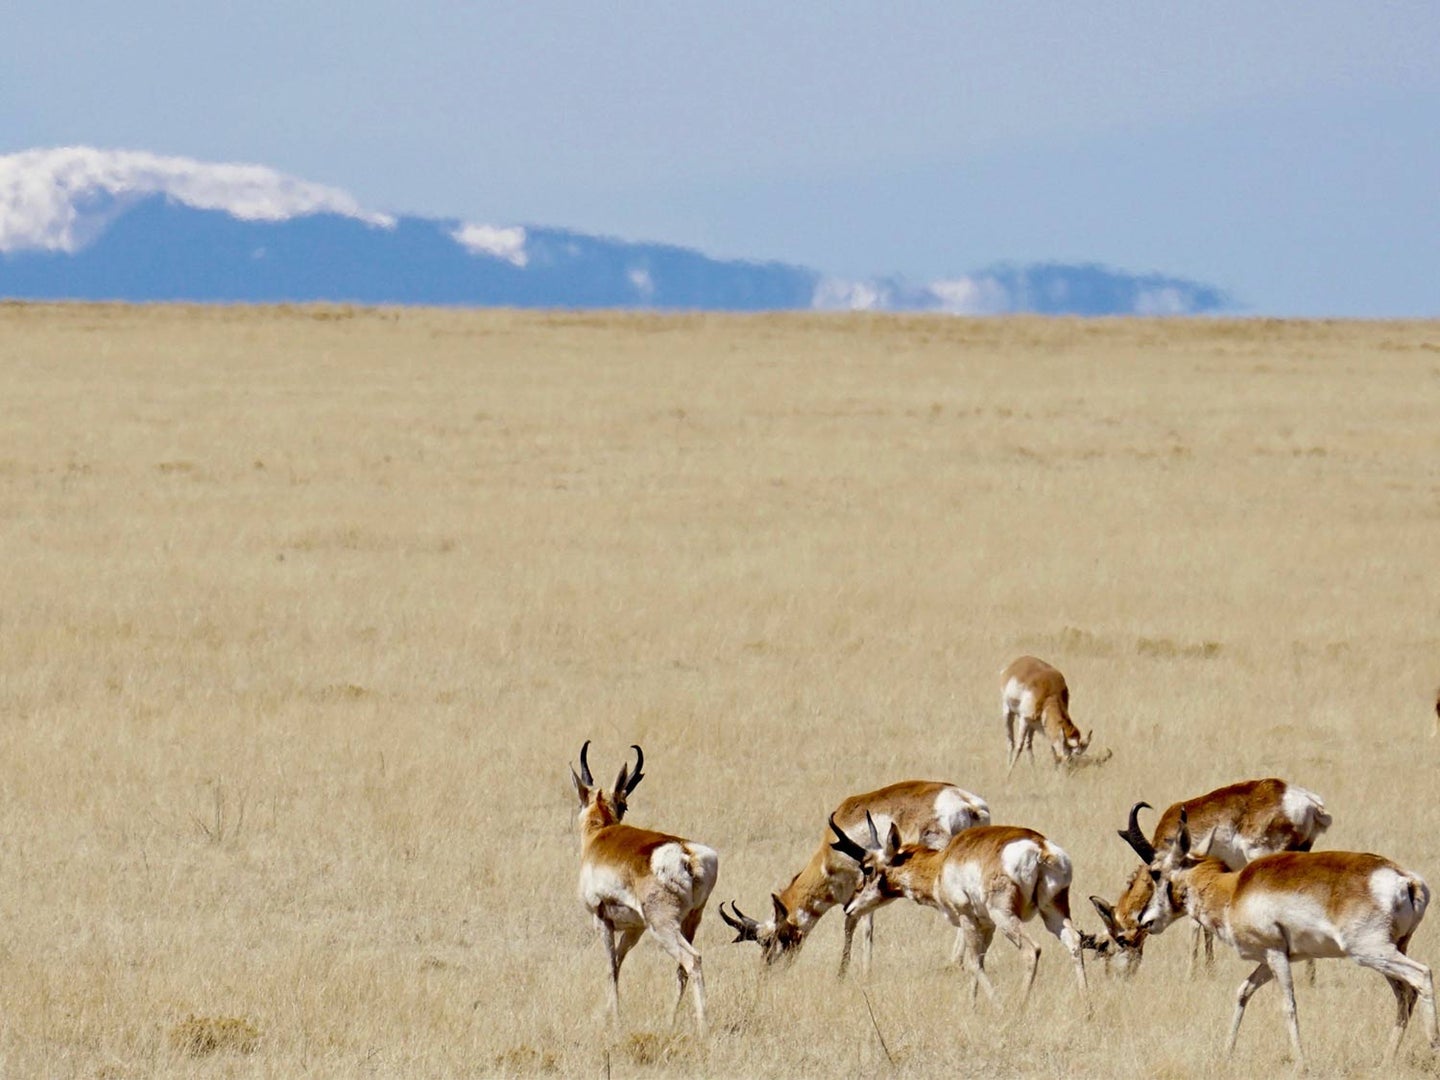 A herd of antelopes in a large open plain.